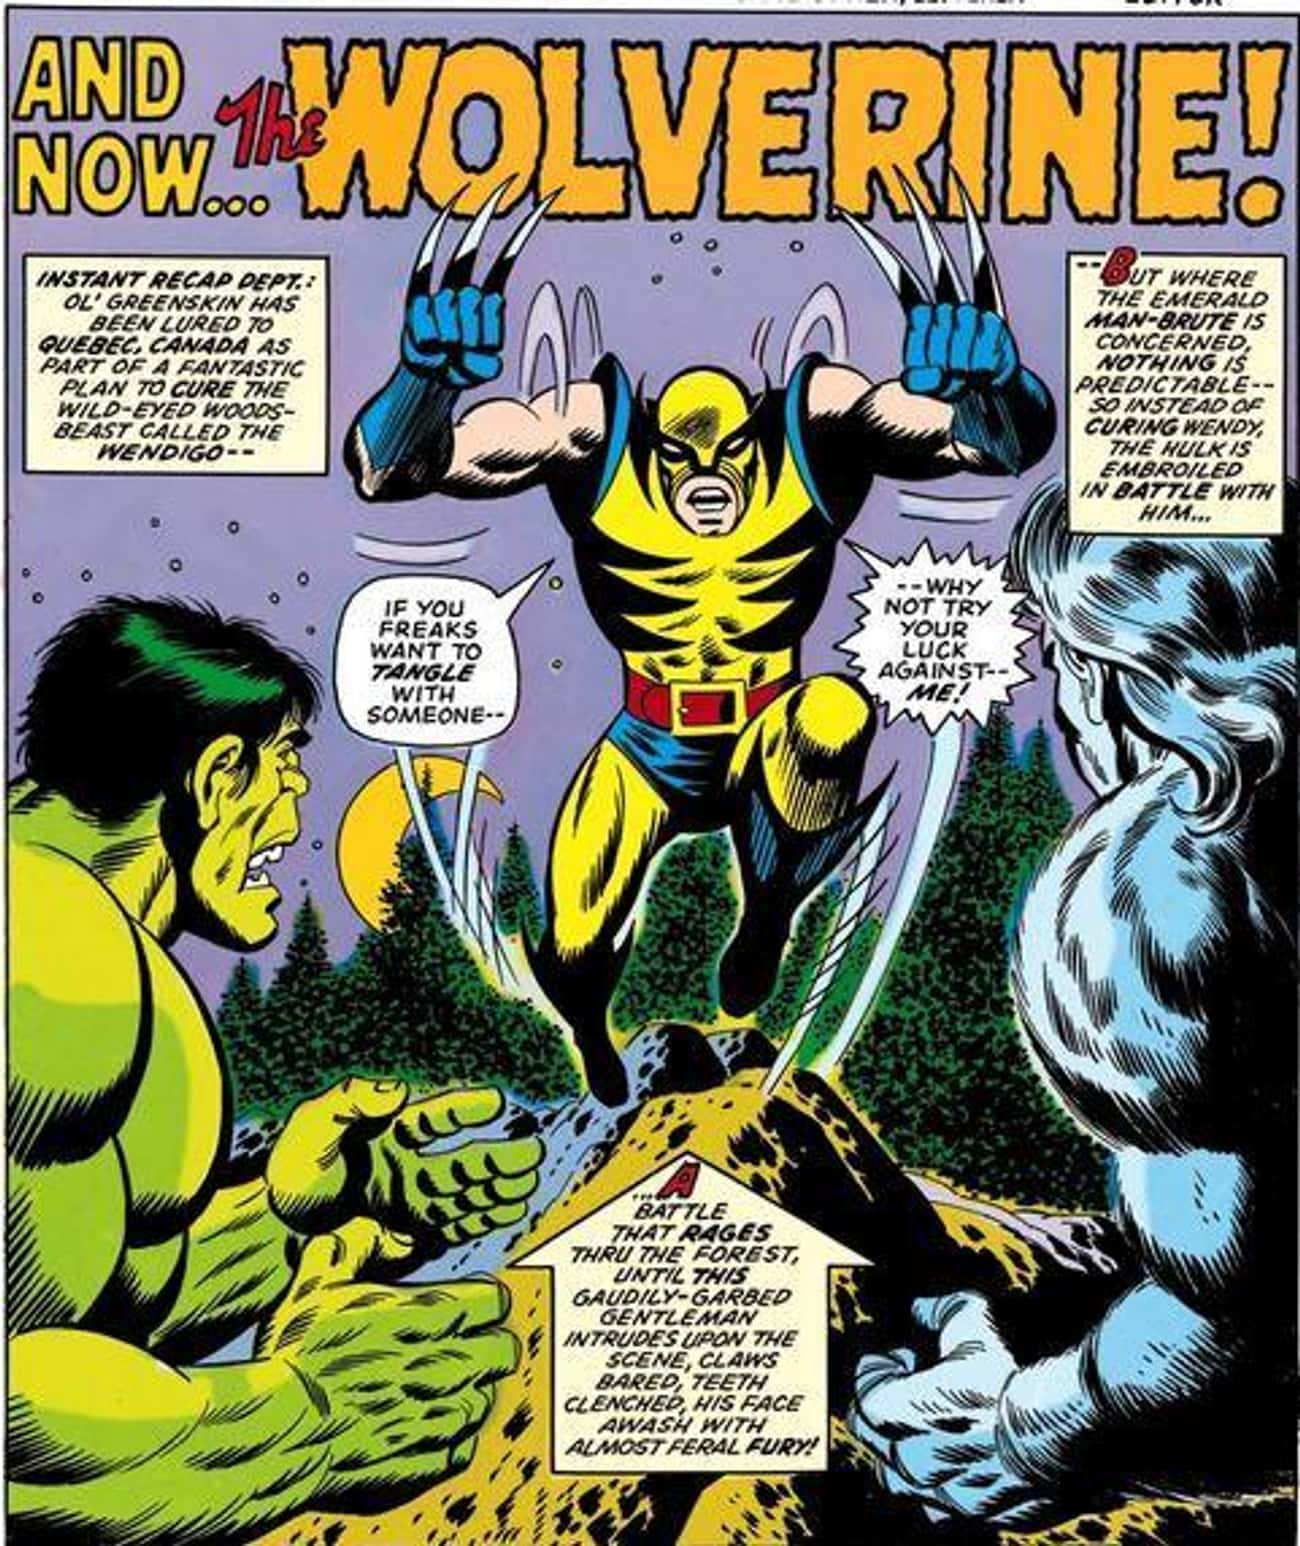 Artists John Romita Sr. And Herb Trimpe Came Up With A Unique Design